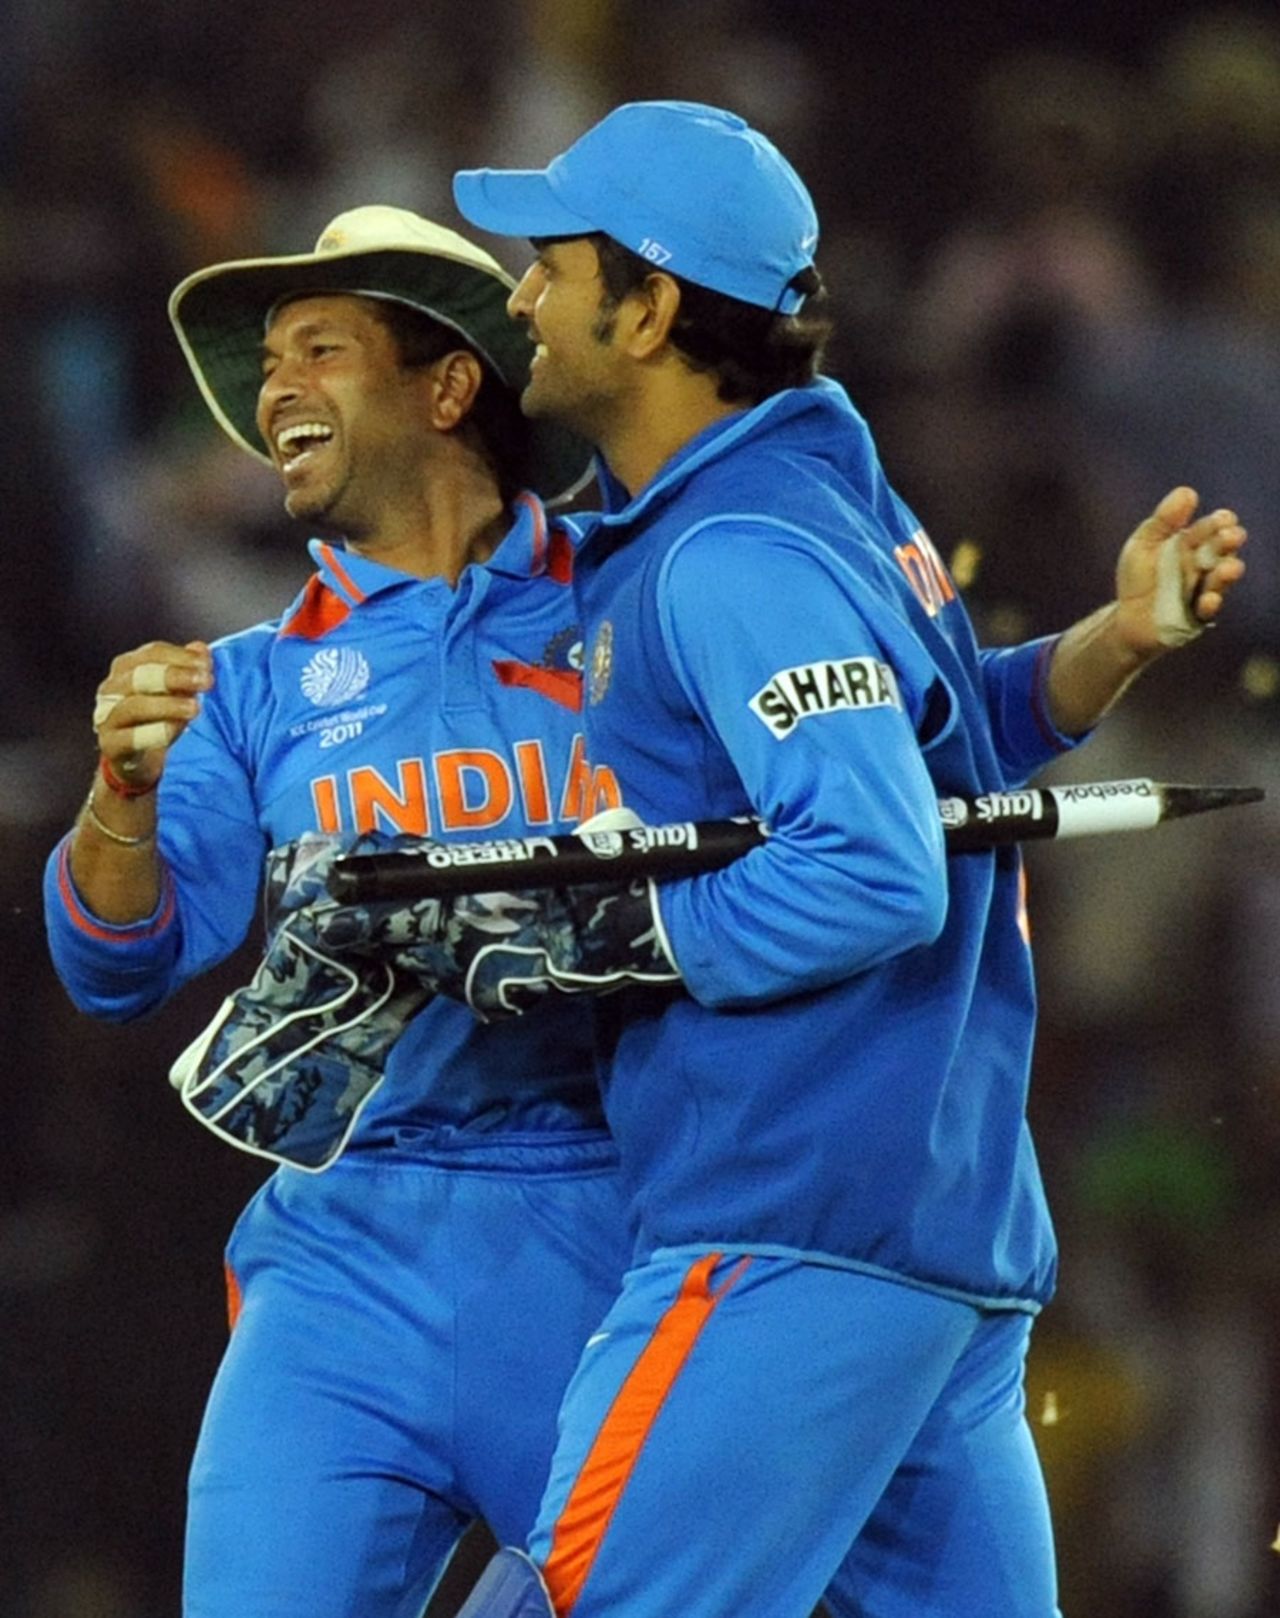 Sachin Tendulkar and MS Dhoni are thrilled after India's win, India v Pakistan, 2nd semi-final, World Cup 2011, Mohali, March 30, 2011